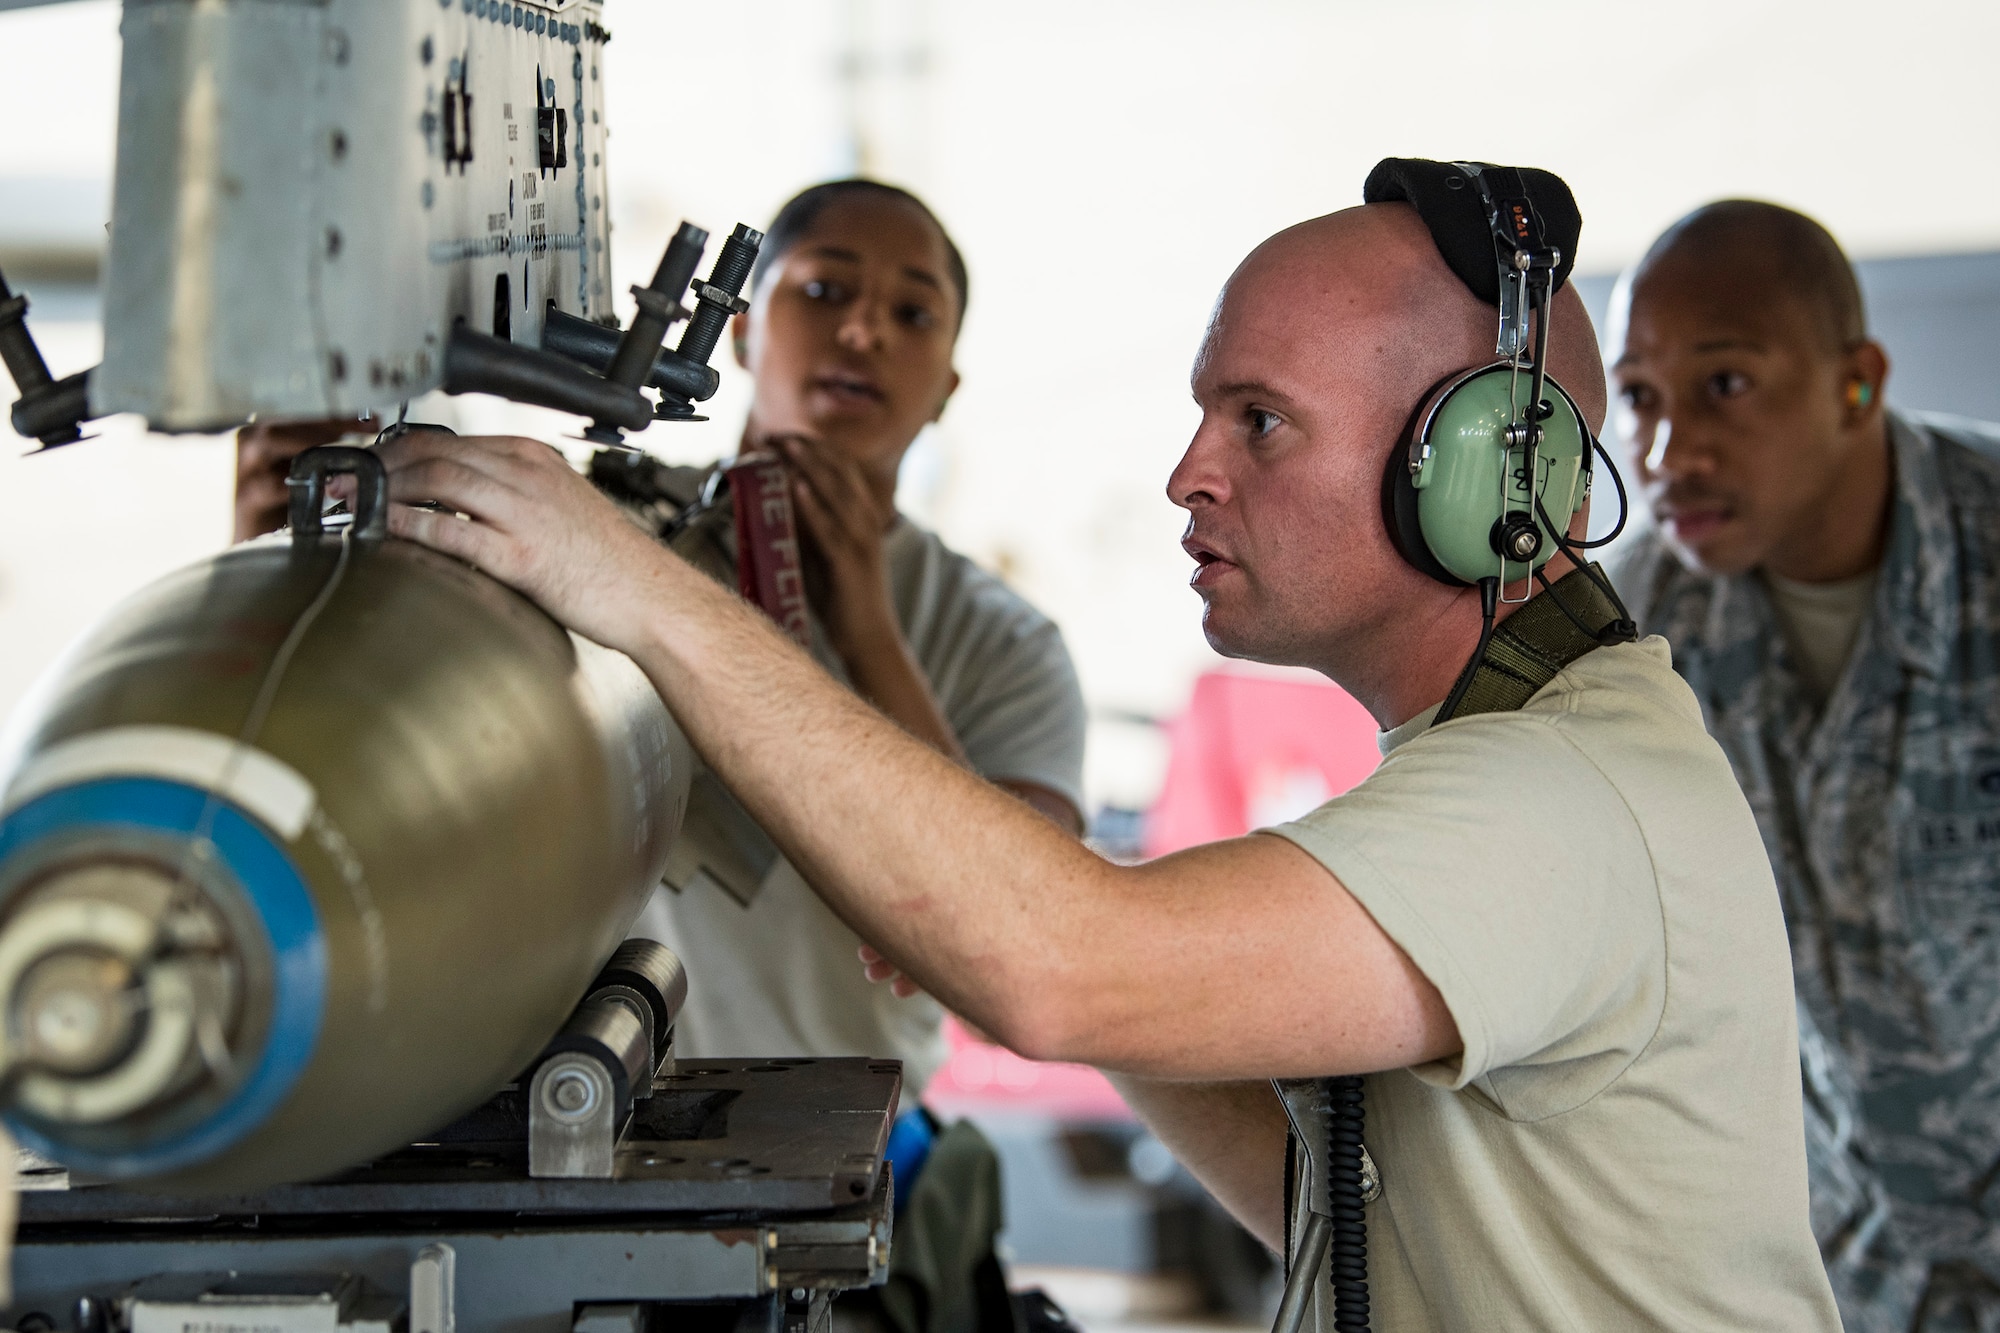 Staff Sgt. Jeff Atha, center, 23d Aircraft Maintenance Squadron weapons load crew chief, inspect a bomb during a Monthly Proficiency Required Load (MPRL), Aug. 7, 2018, at Moody Air Force Base, Ga. The weapons standardization section ensures weapons load crews are combat ready through evaluations consisting of MPRLs, semi-annual evaluations and flightline inspections. (U.S. Air Force photo by Airman Taryn Butler)